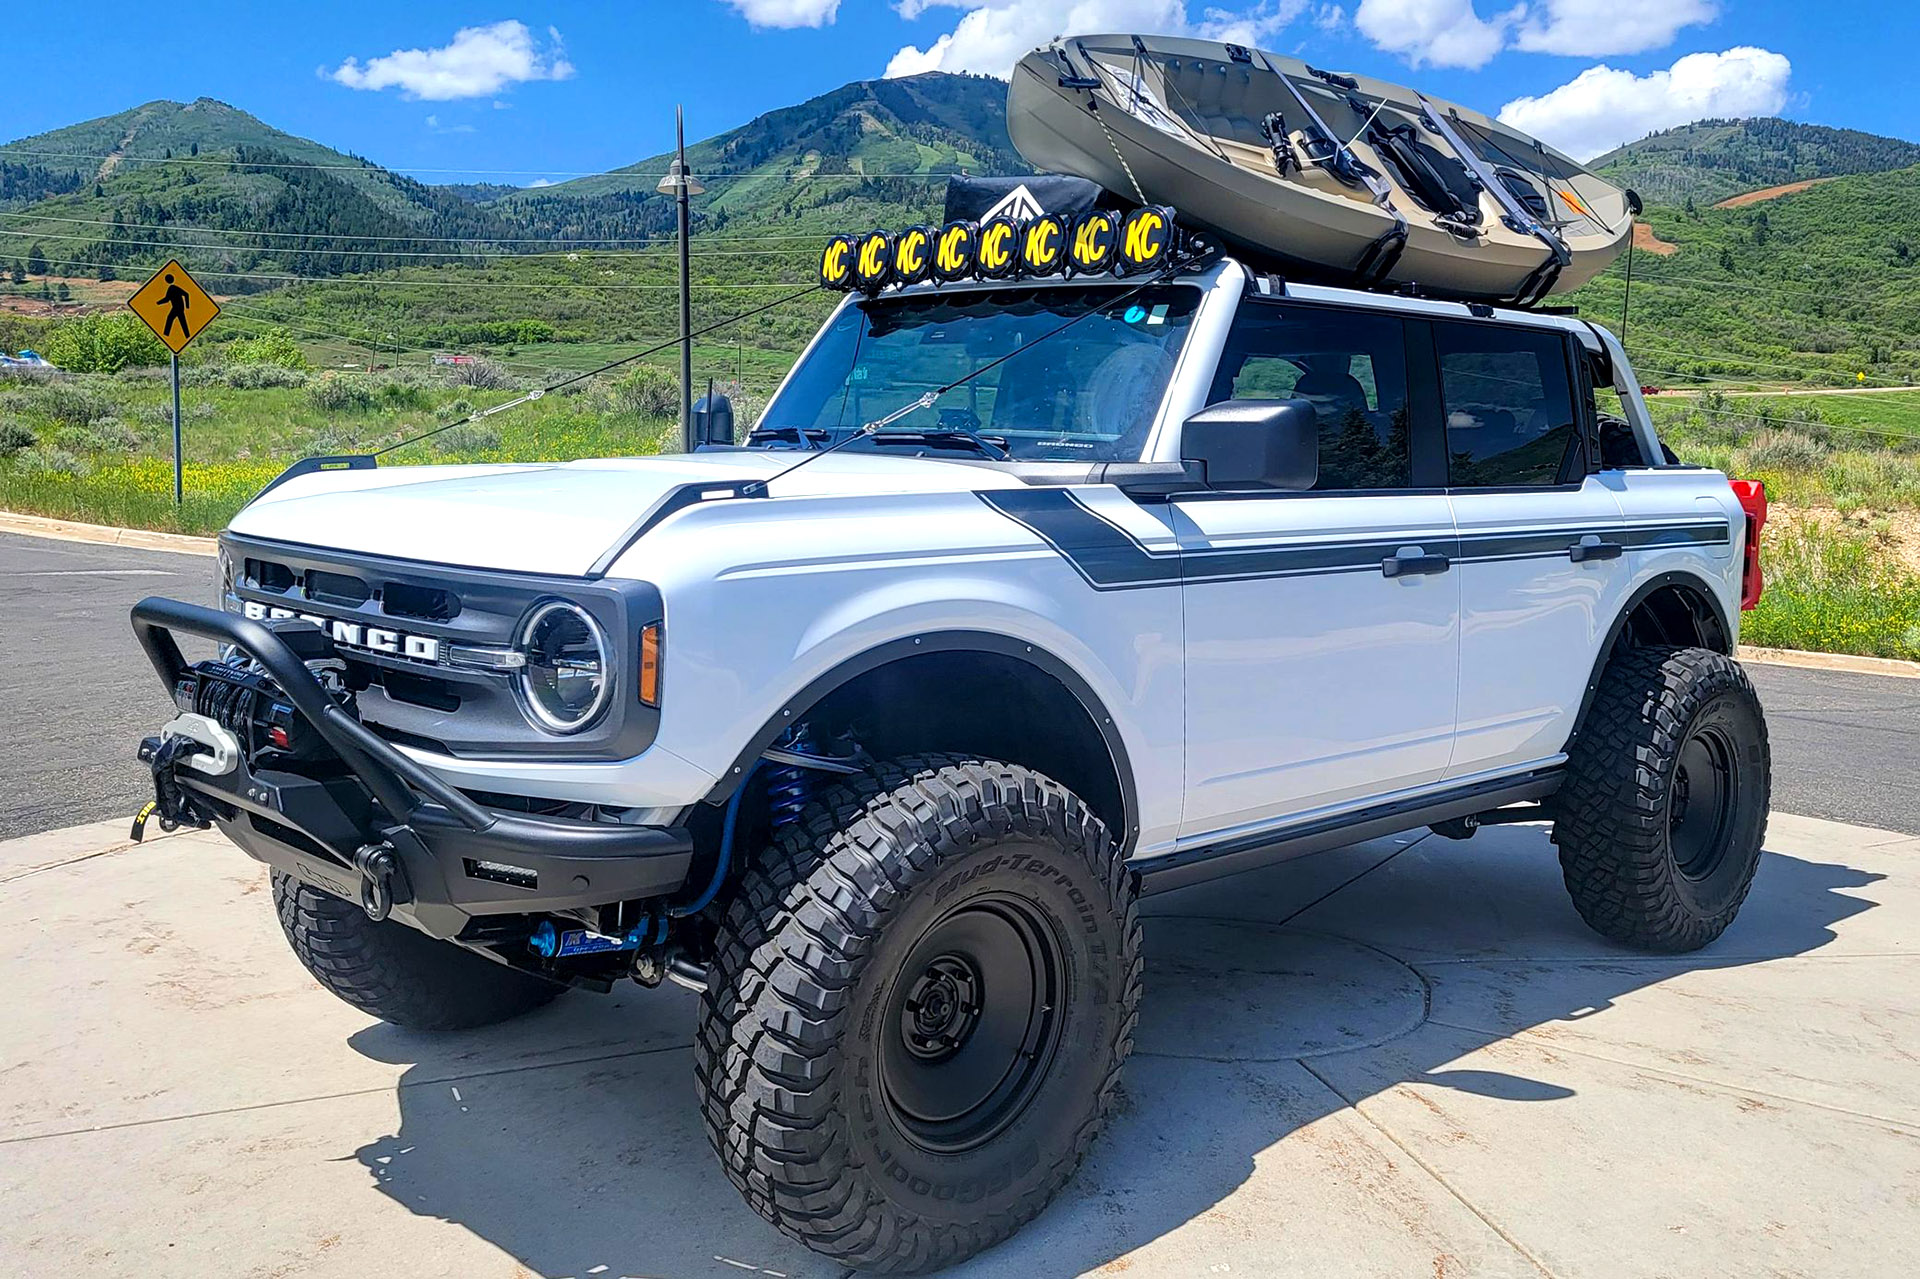 Skip The Line And Go Wild With This 900 Mile Overland-Focused 2021 Ford Bronco Big Bend Auto Recent